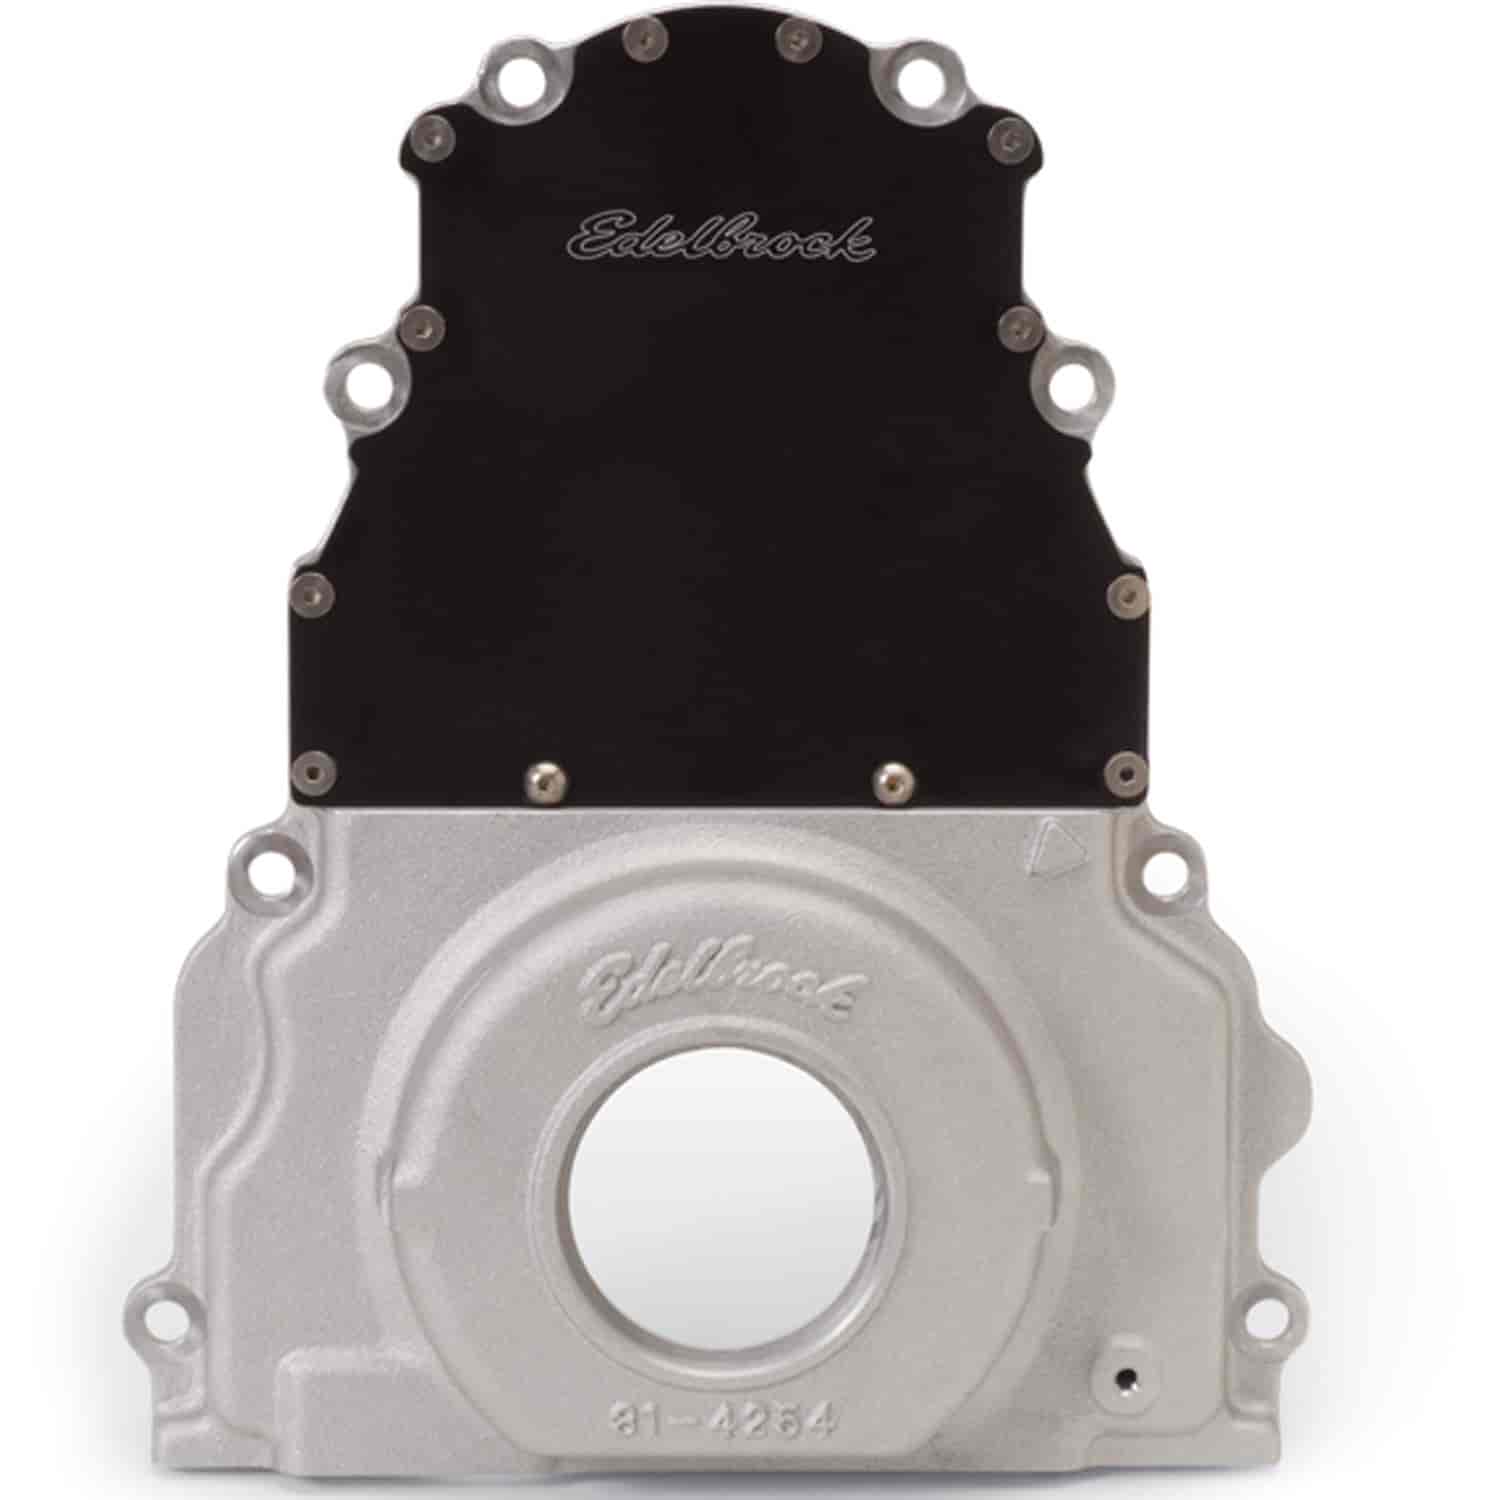 Timing Cover for Gen III LS with Rear Cam Sensor